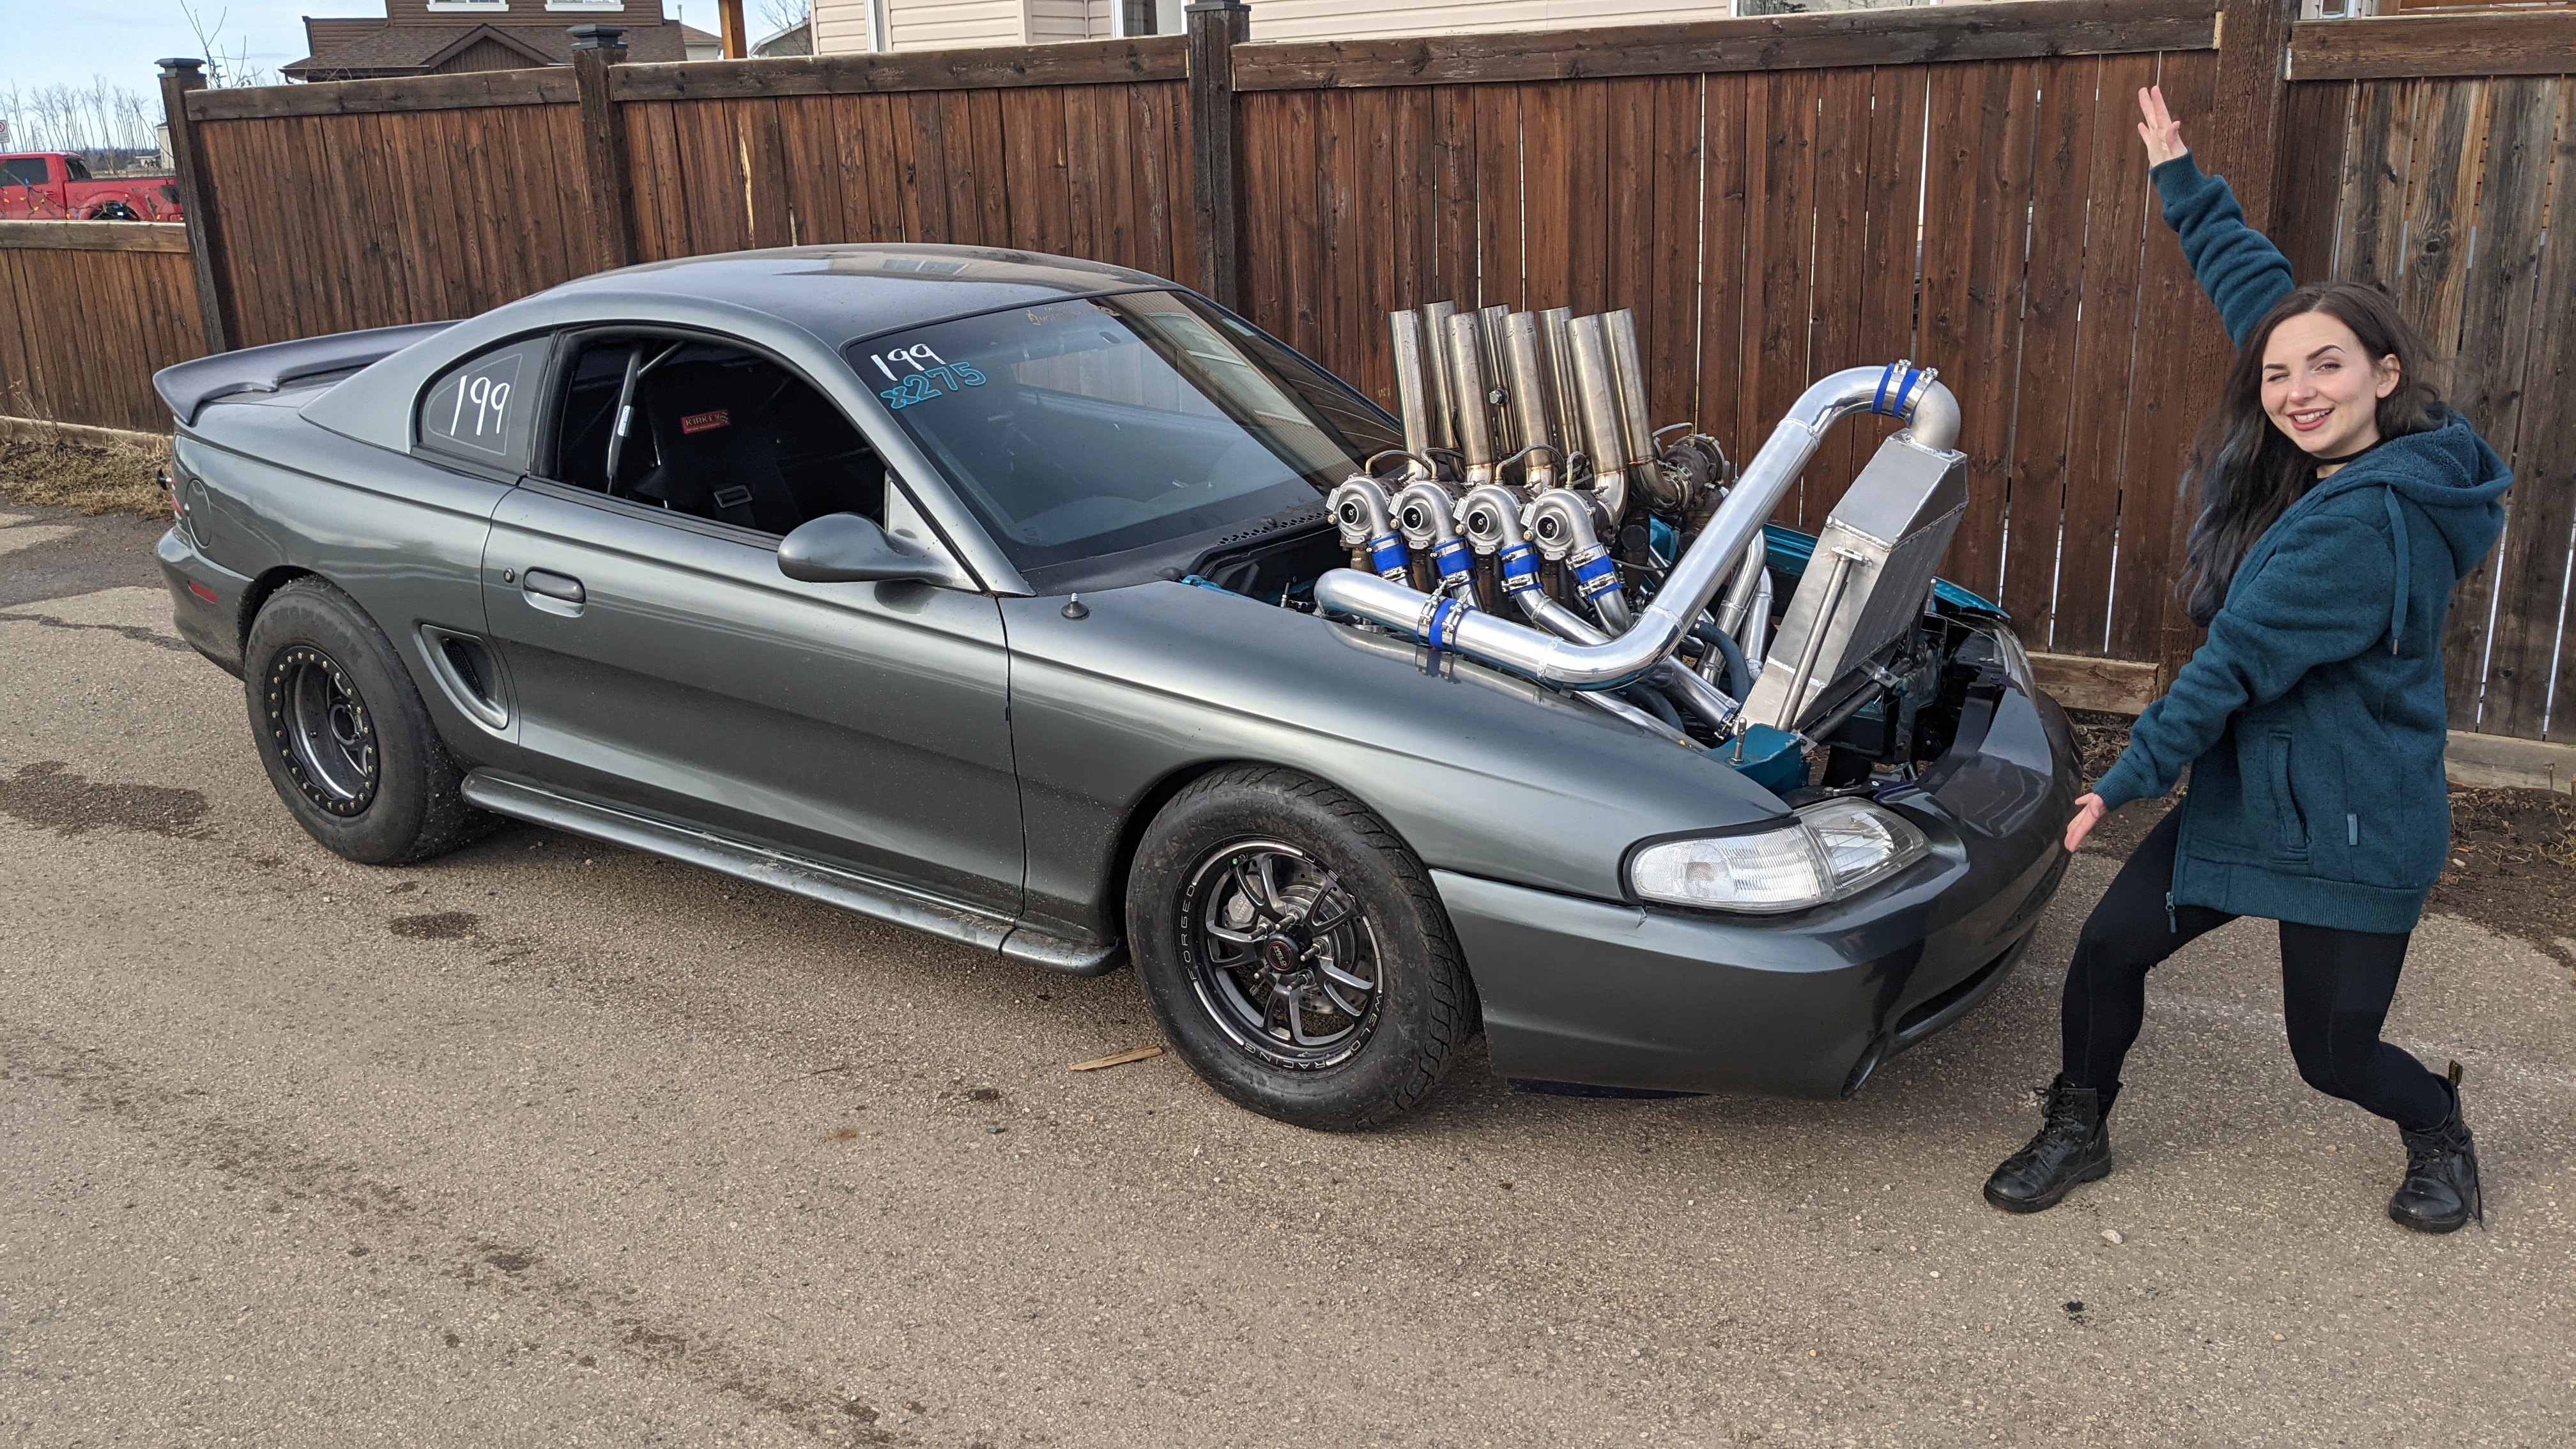 LS Swapped Ford Mustang with 8 Turbos.